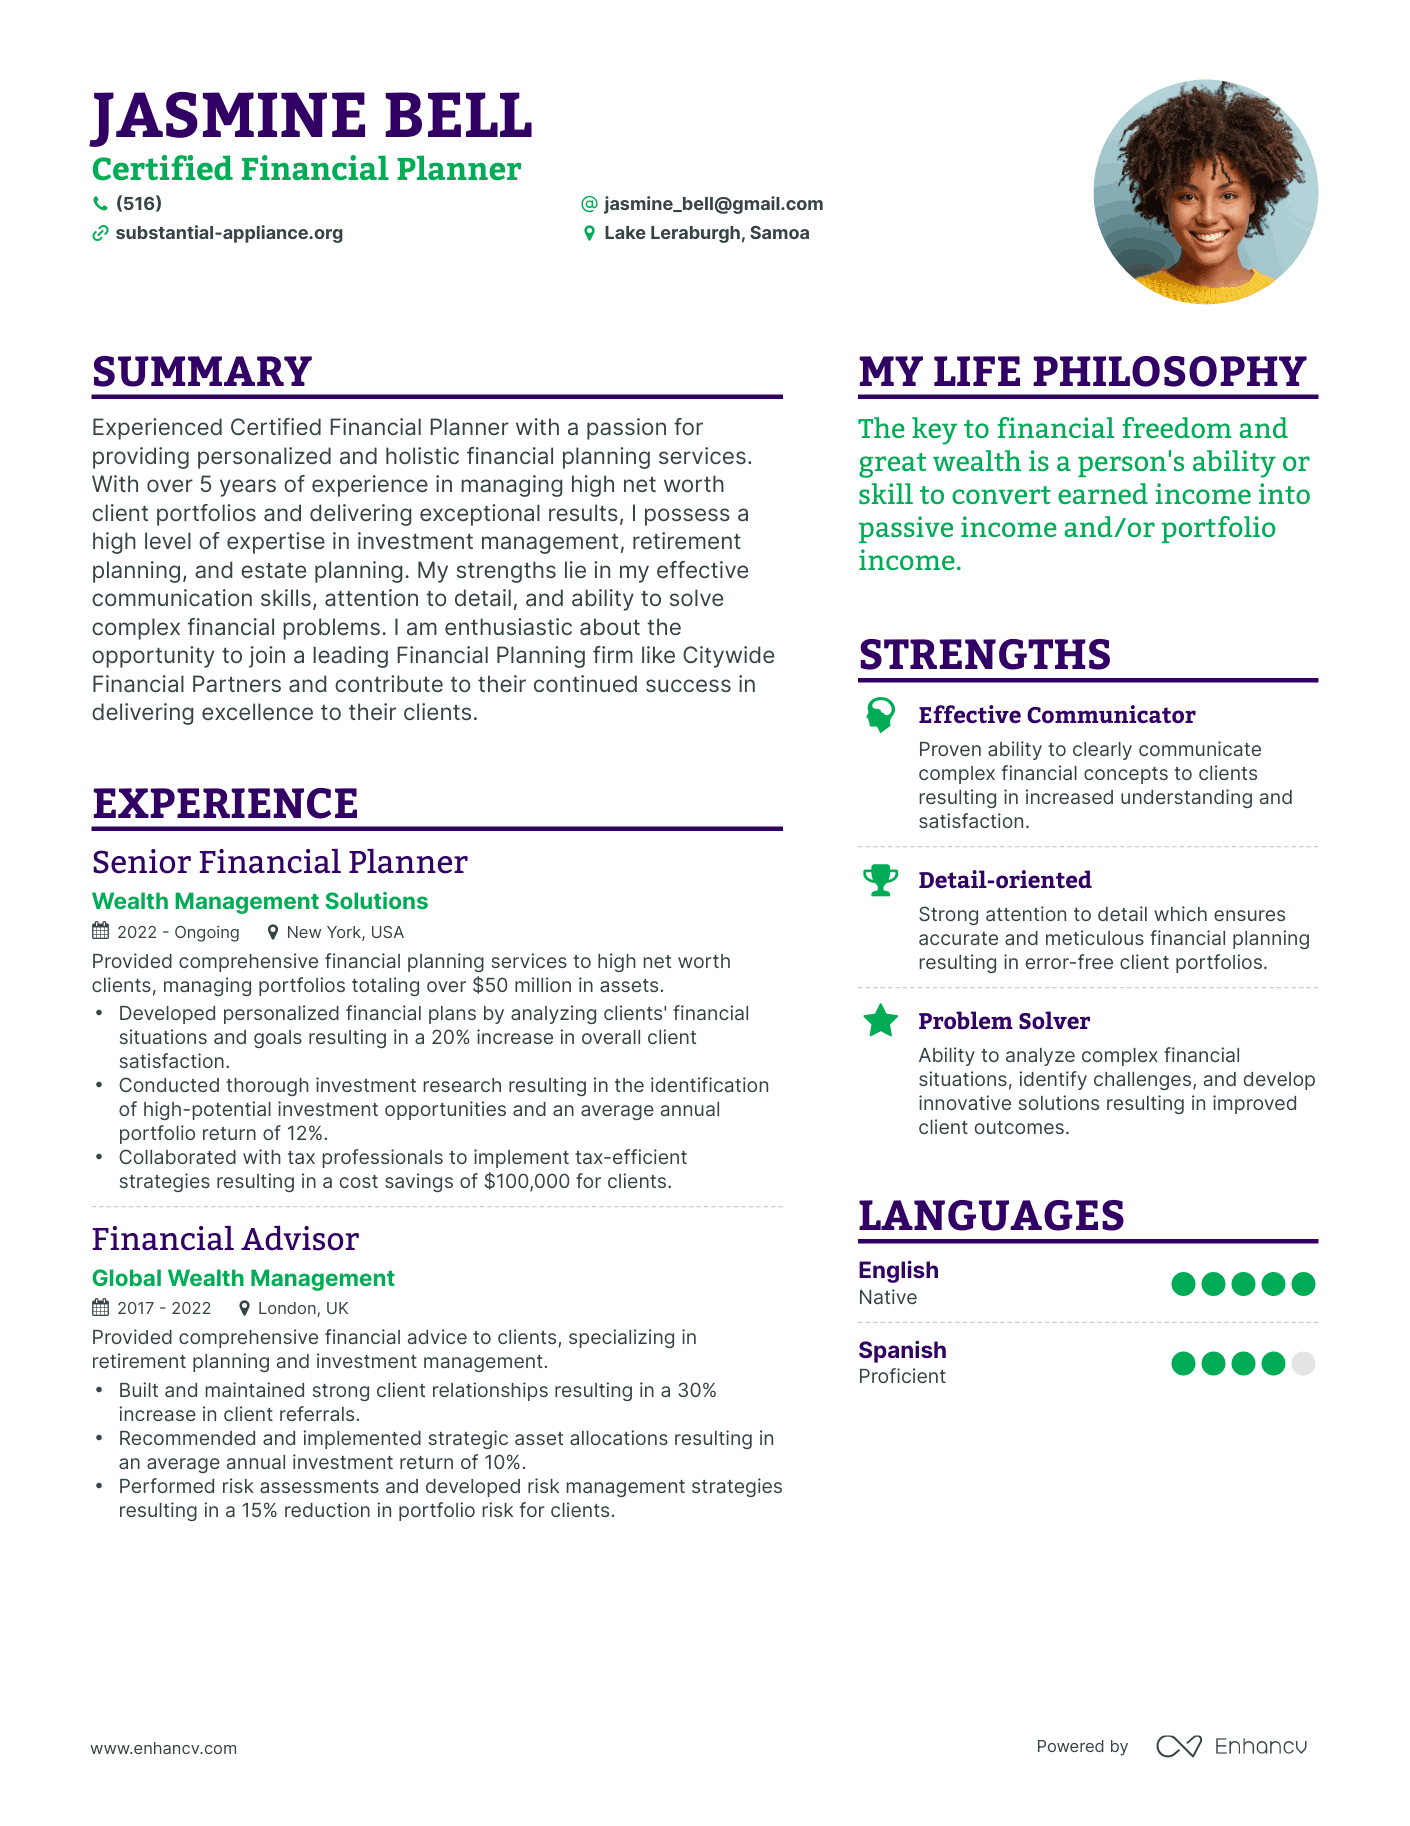 Certified Financial Planner resume example